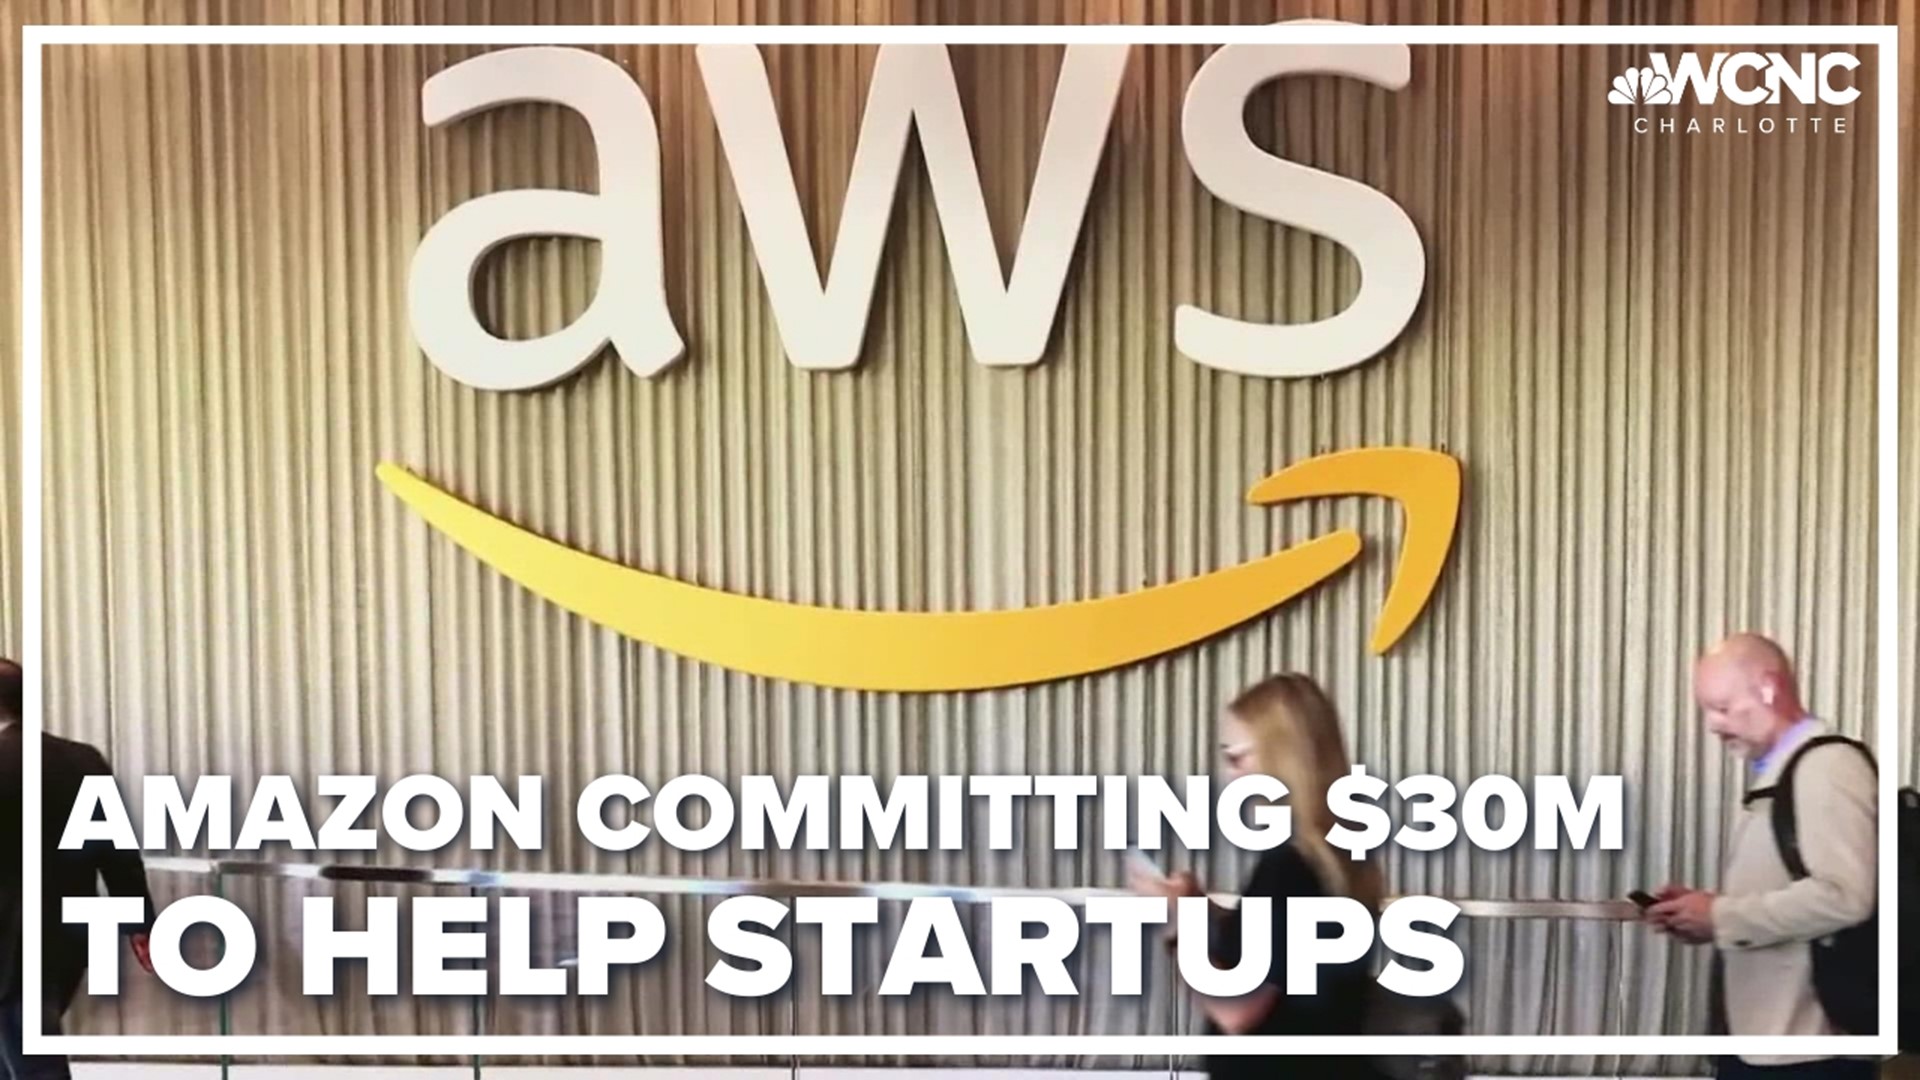 Each qualifying startup will get a $125,000 grant and up to $100,000 in Amazon Web Service credits.